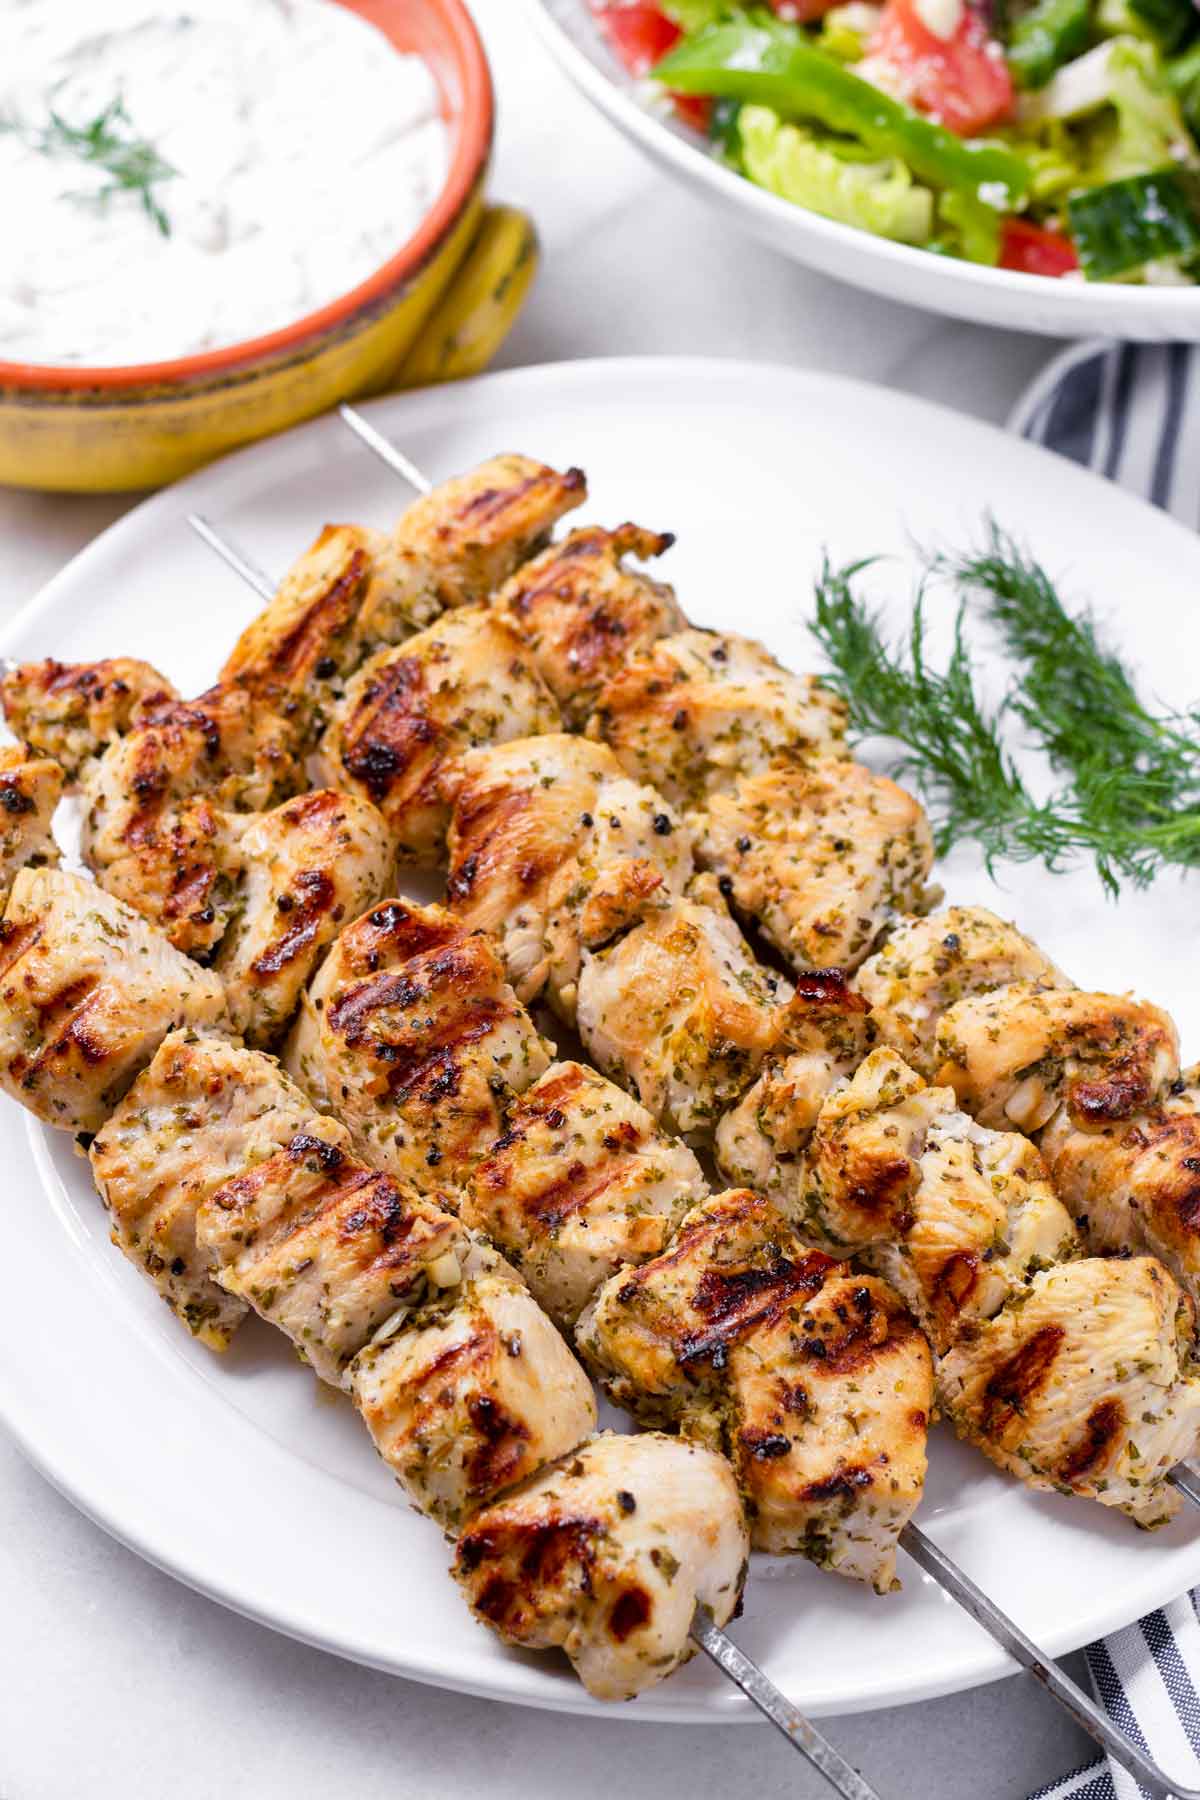 grilled chicken skewers with sauce and salad on the side